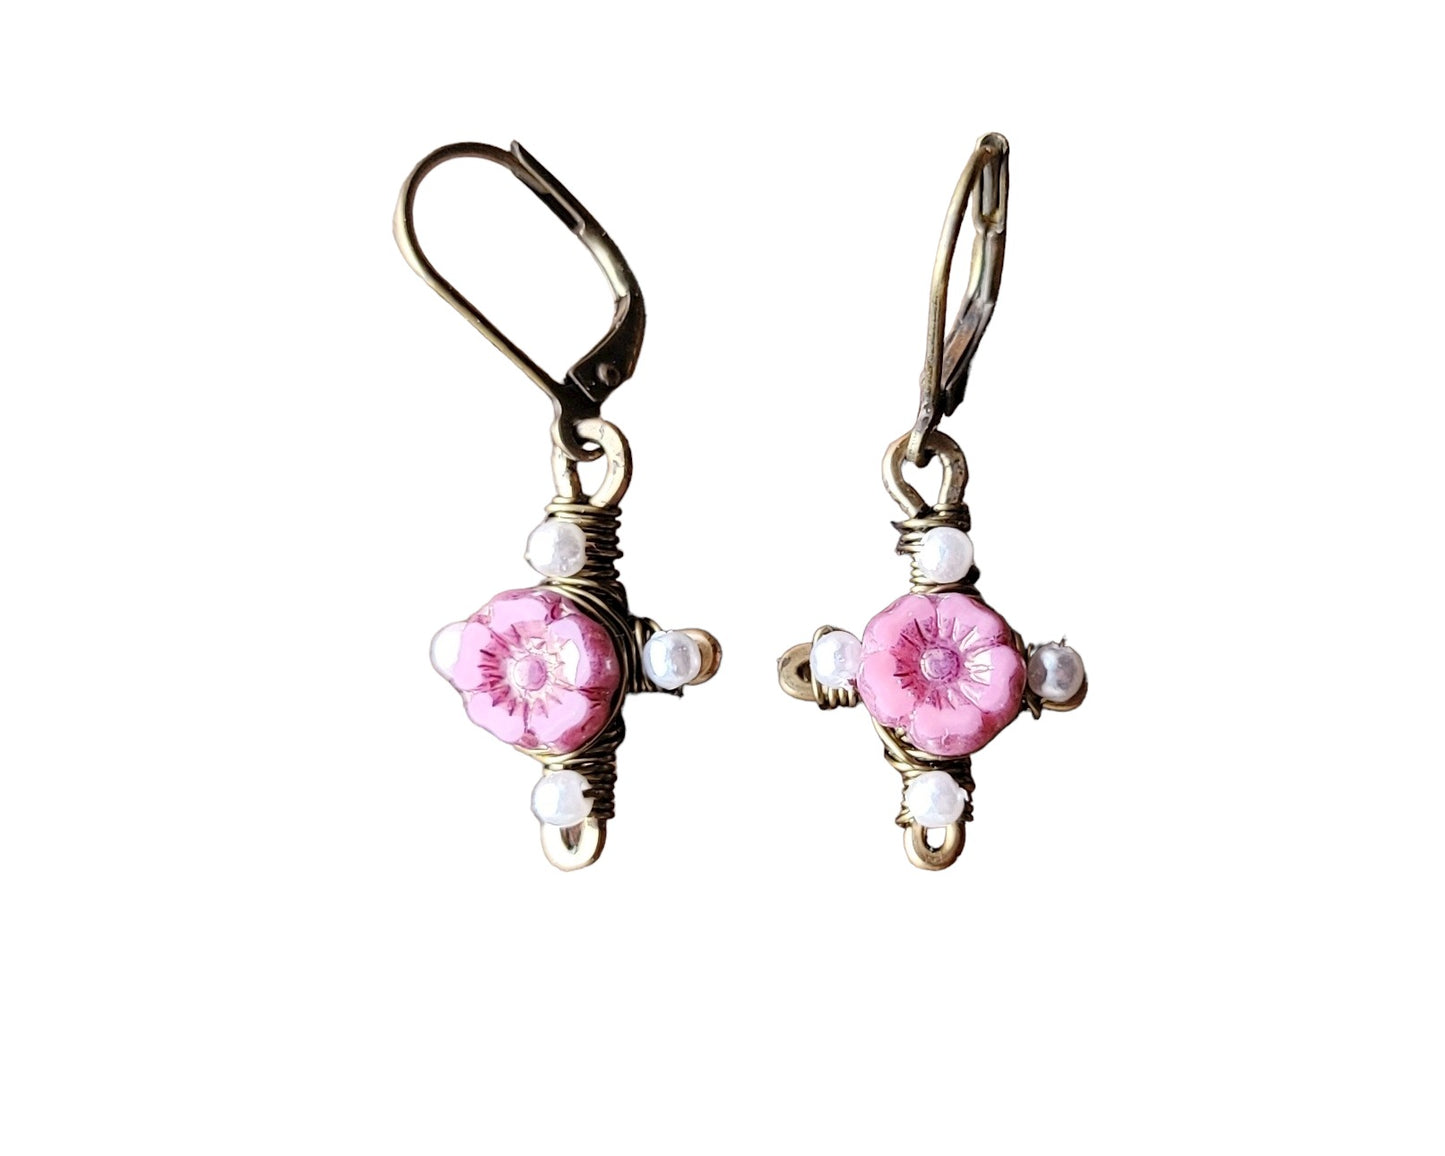 Antique Style Pink Flower Cross, Vintage Inspired Cross Earrings with red flowers in the centre and tiny white pearls on the four points of the cross made with antiqued brass metal.